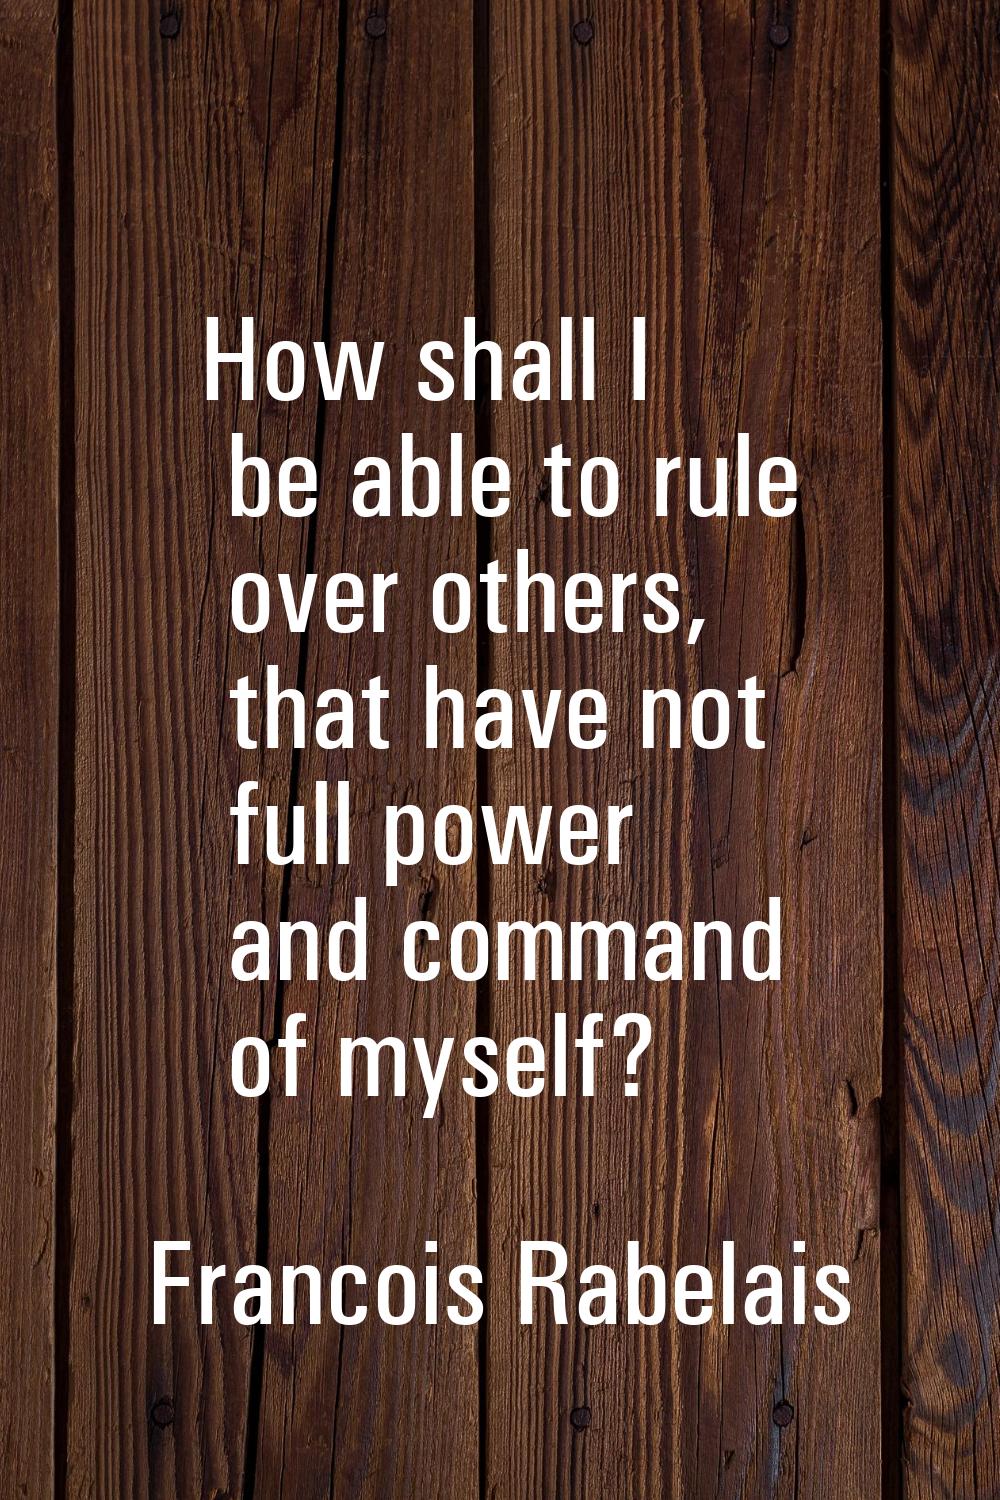 How shall I be able to rule over others, that have not full power and command of myself?